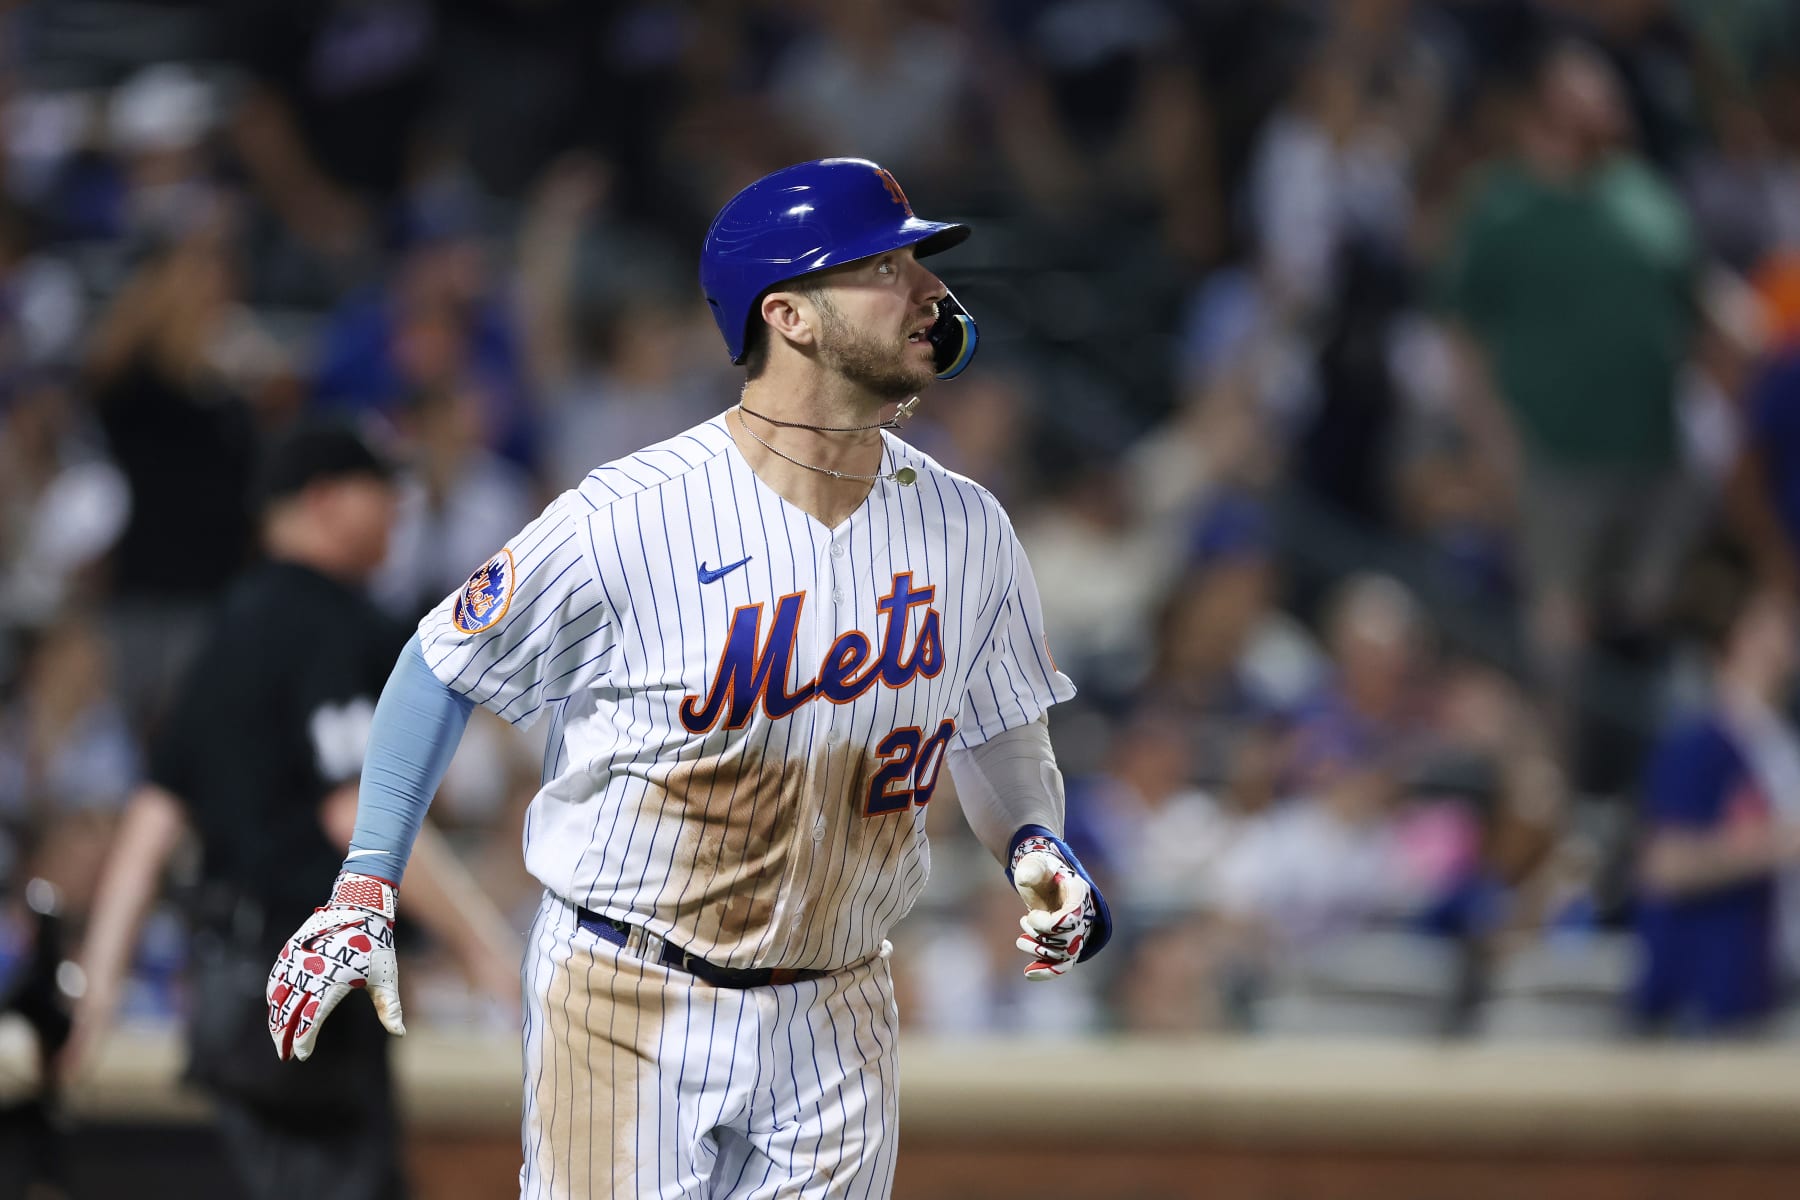 Mets' Pete Alonso returns from injured list earlier than expected